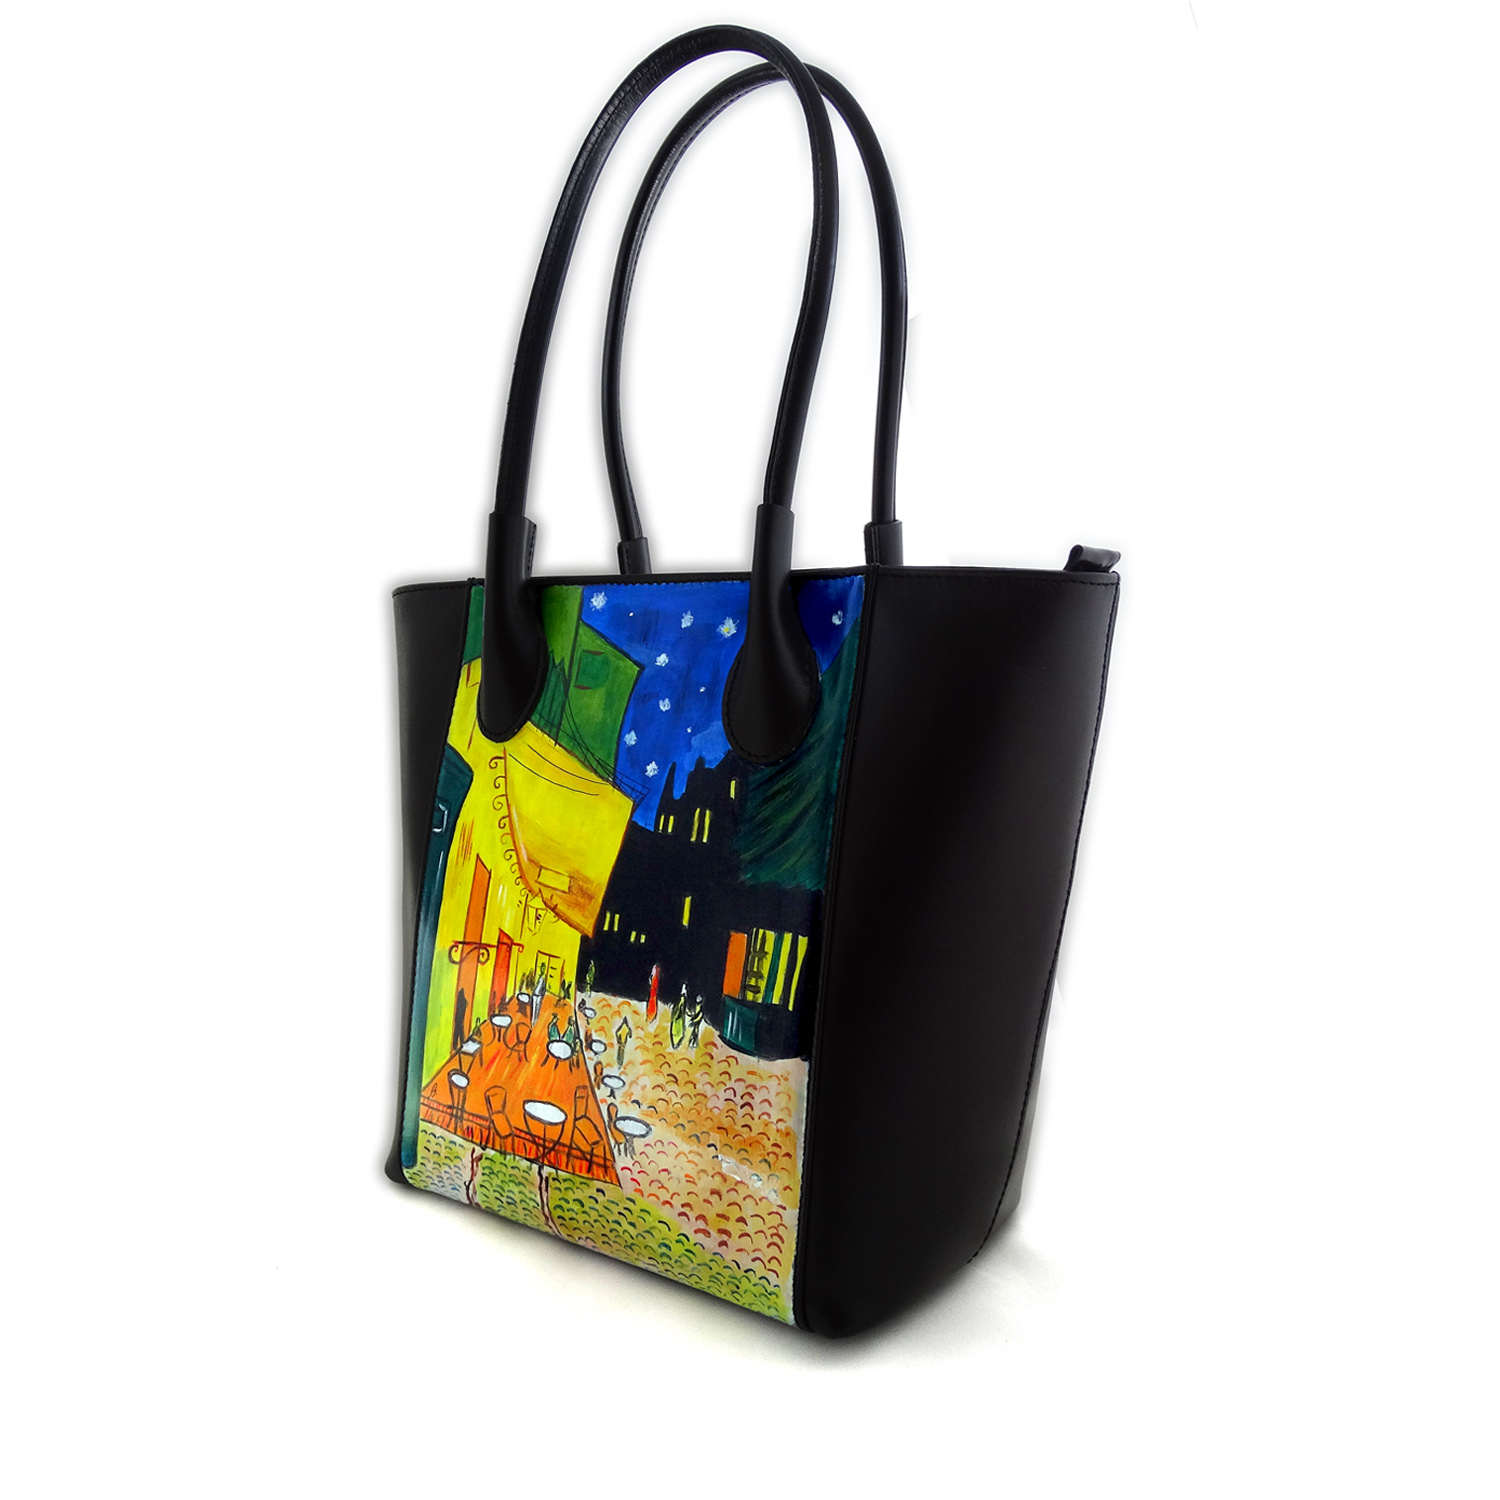 Hand painted bag - The Night Café by Van Gogh